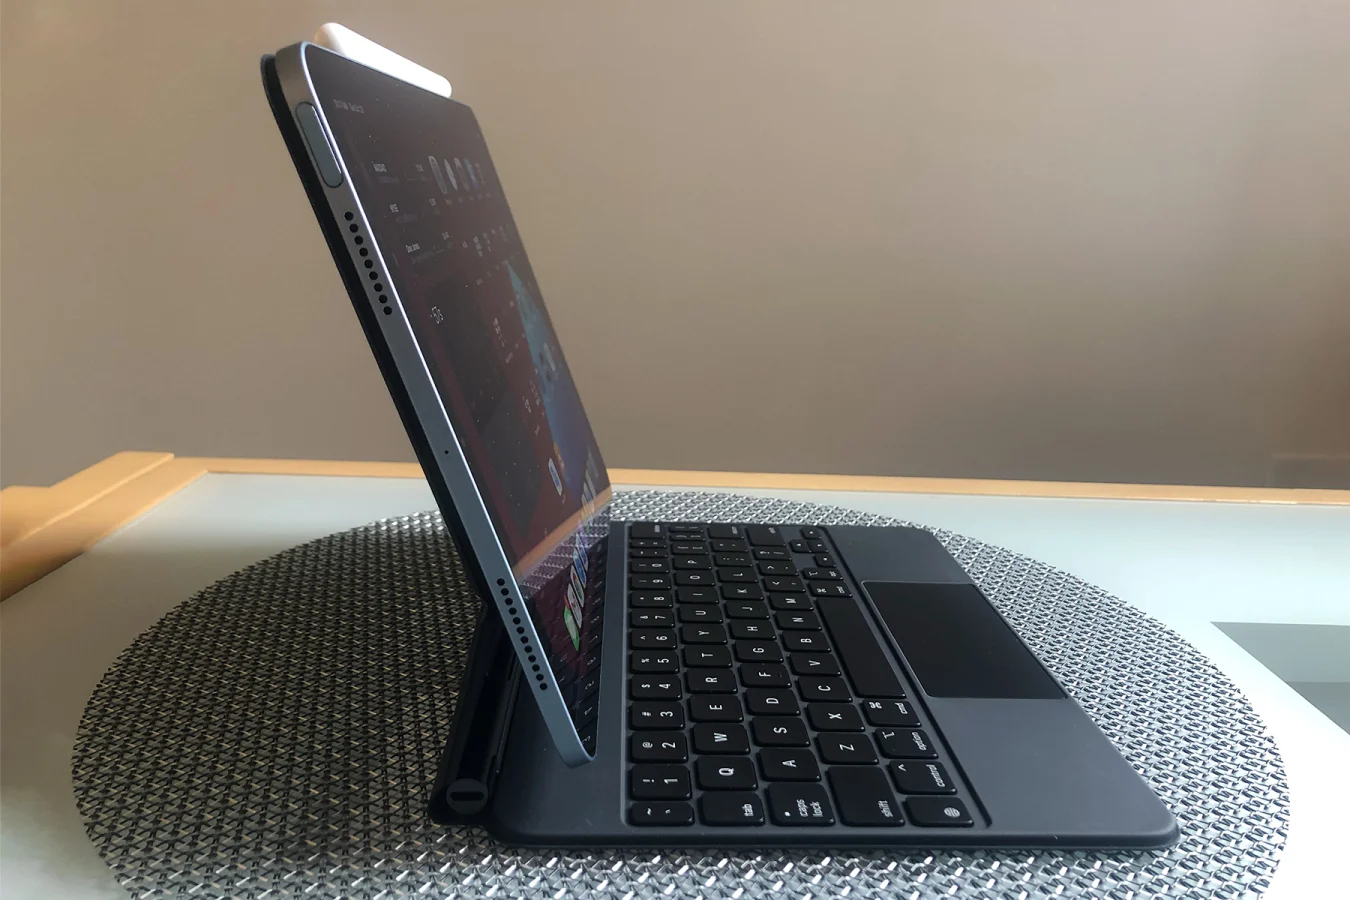 A side view of the 2020 Apple iPad Air, with the Magic Keyboard accessory attached.